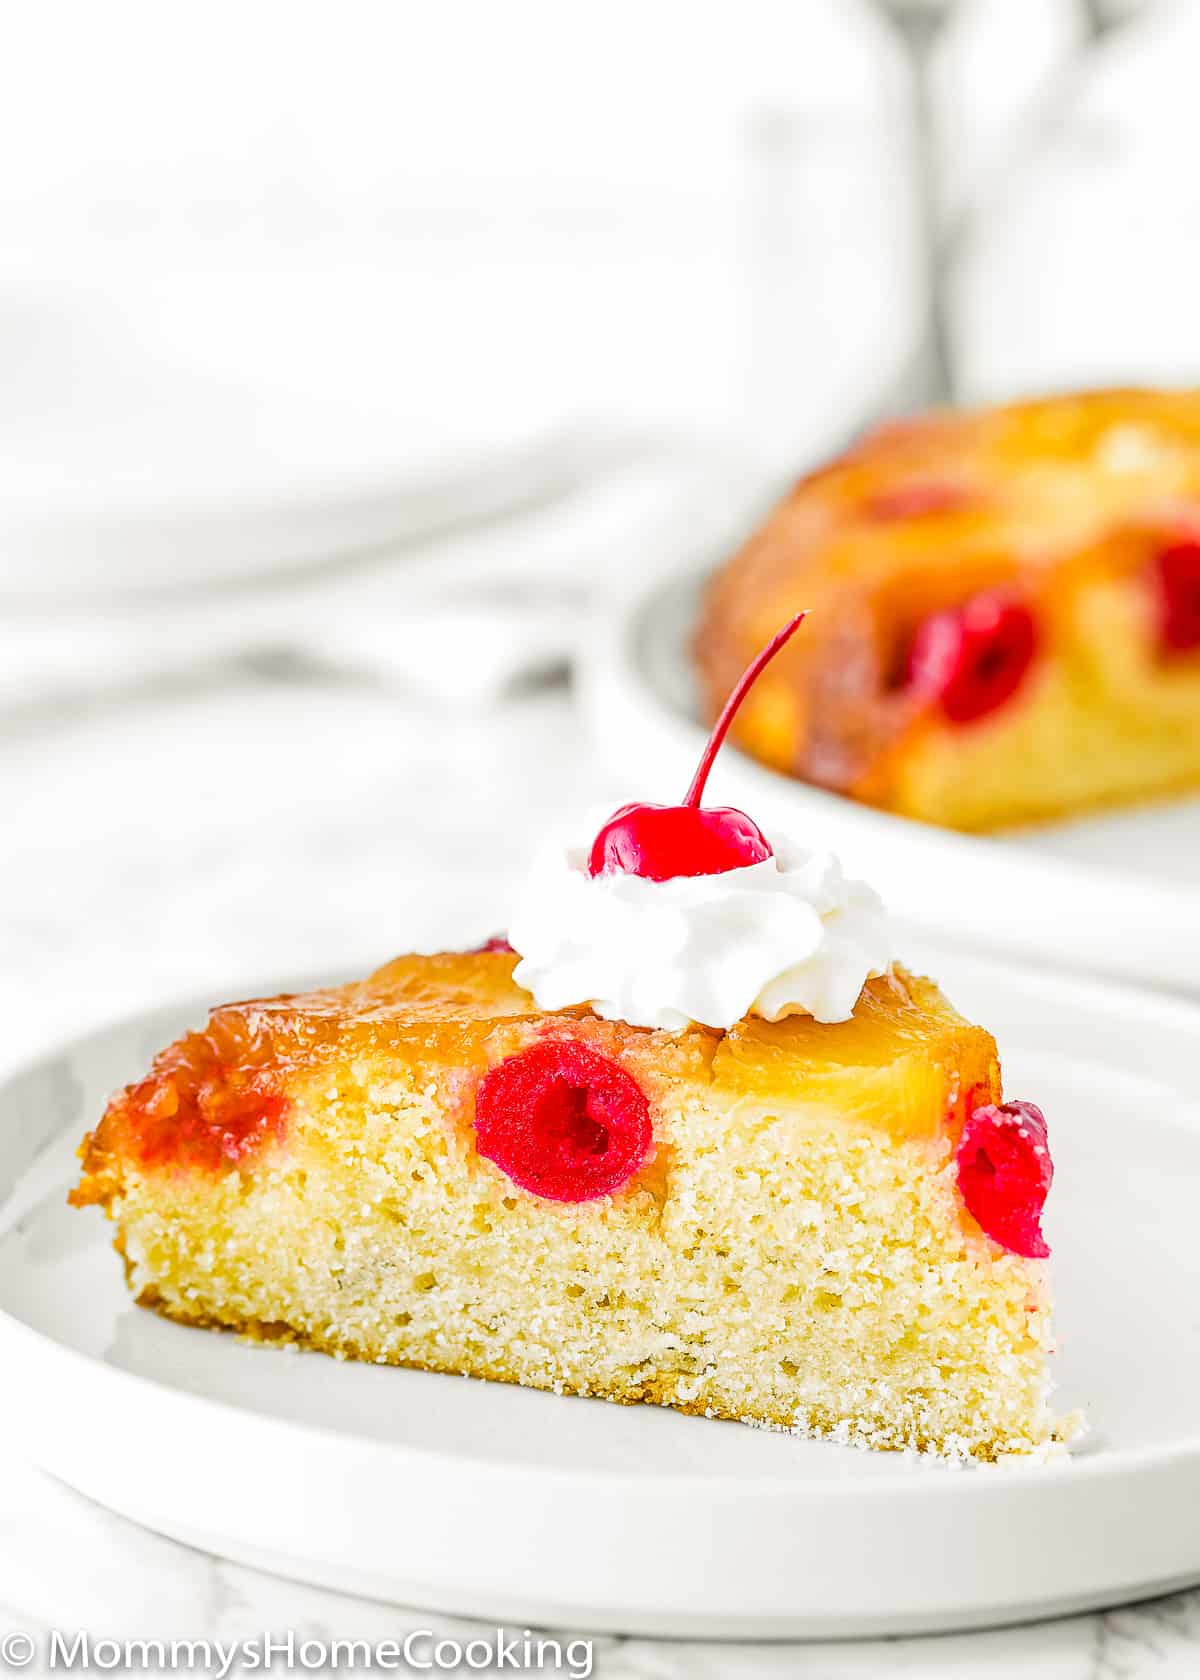 slice of Eggless Pineapple Upside Down Cake with whipped cream on a plate.